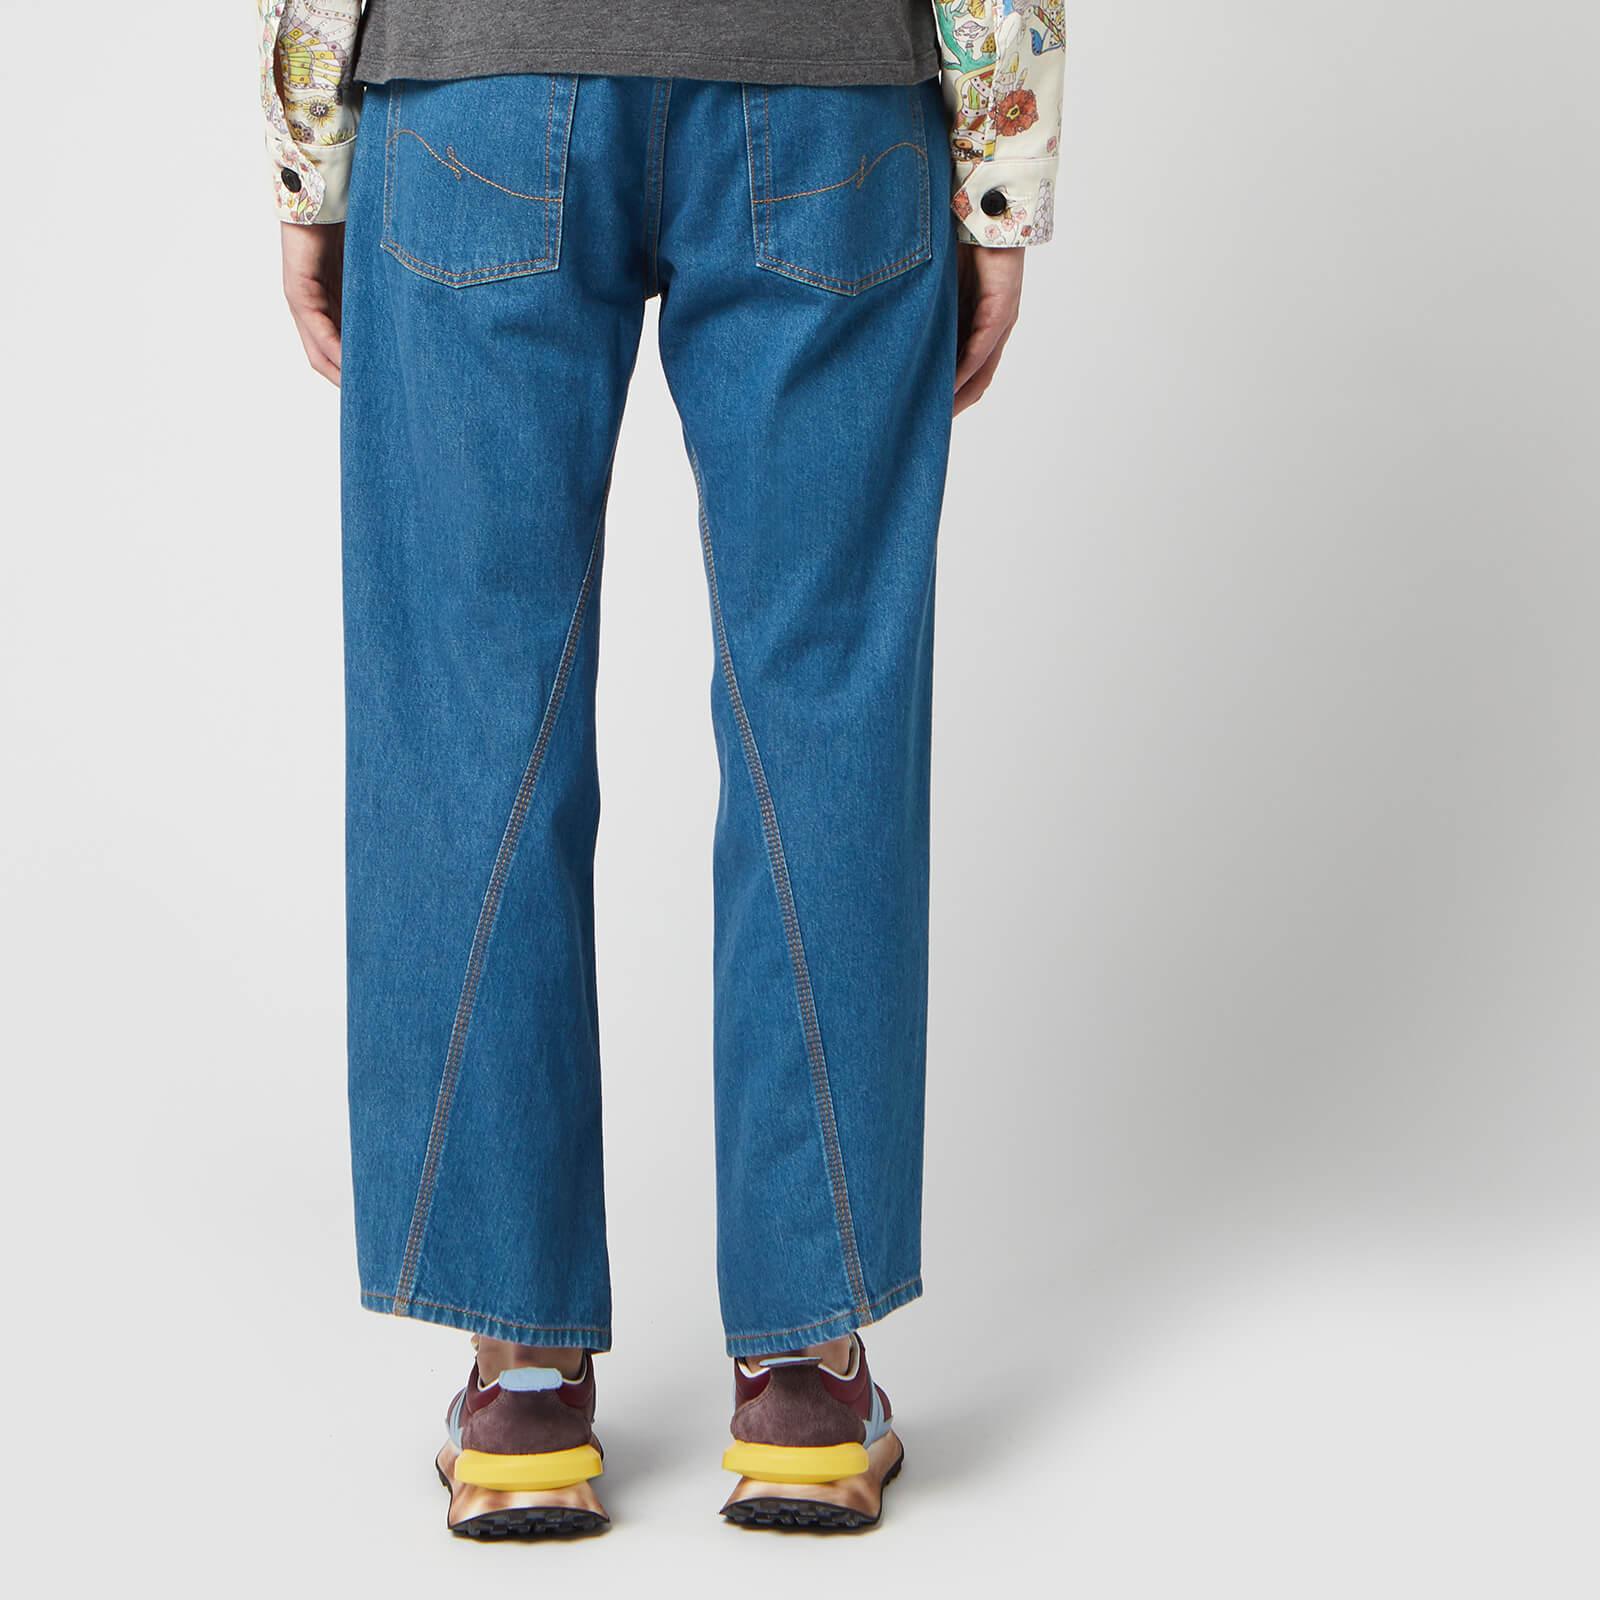 Lanvin Washed Denim Twisted Seam Jeans in Blue for Men - Lyst